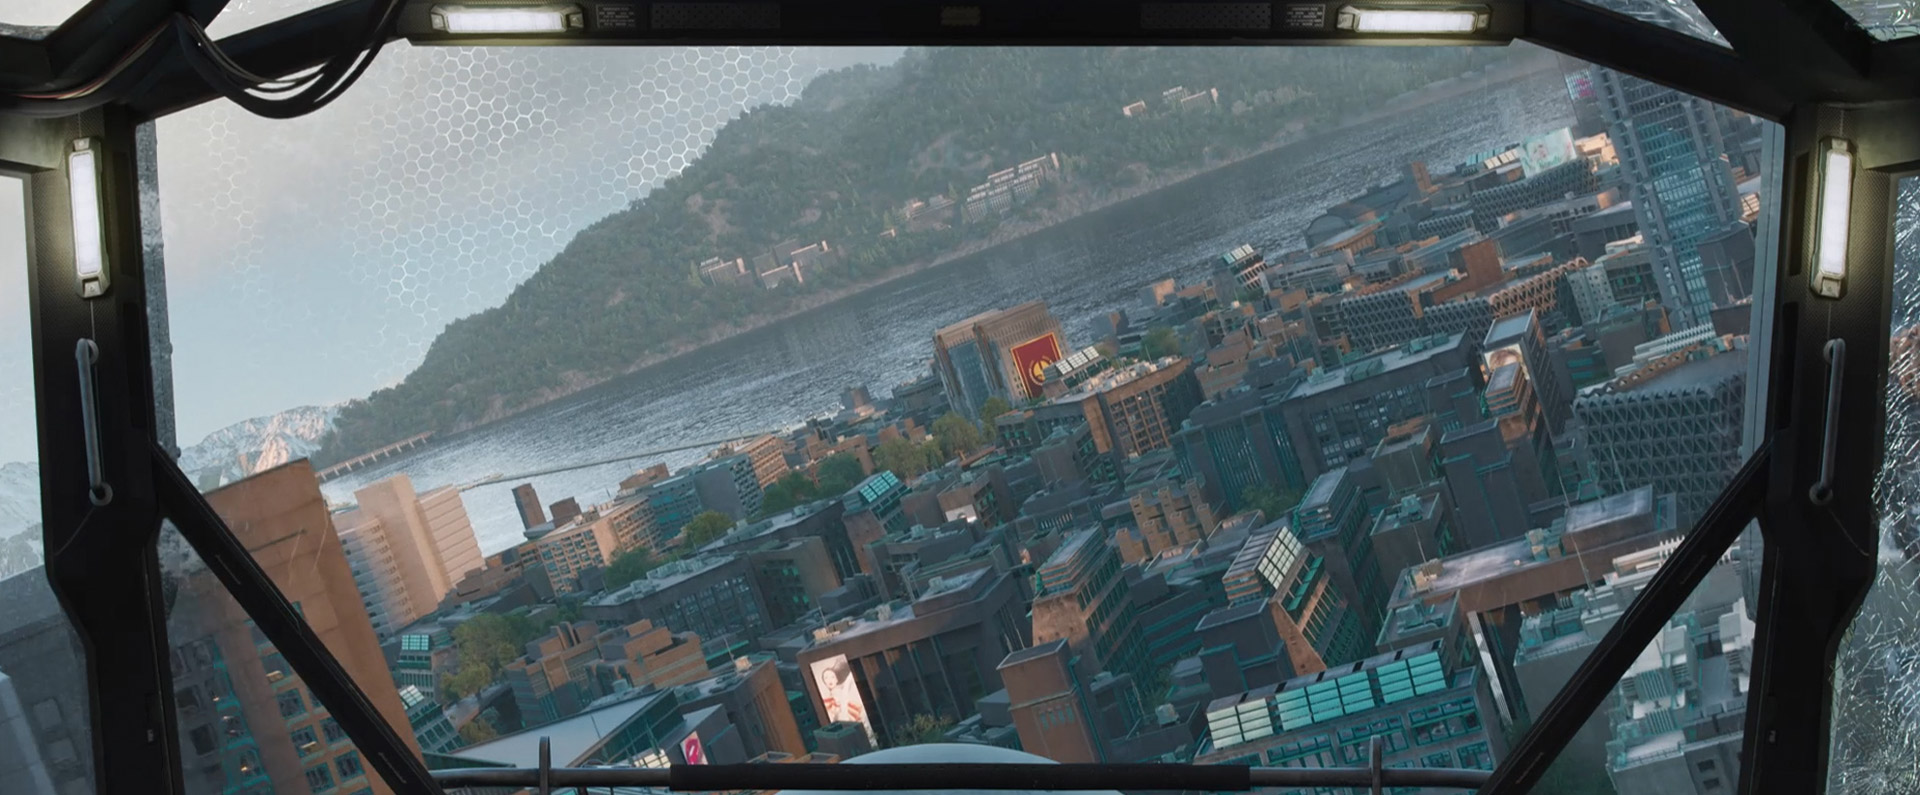 The view of a city block through a heads up display in a aircraft, there is a hill and a body of water in background.